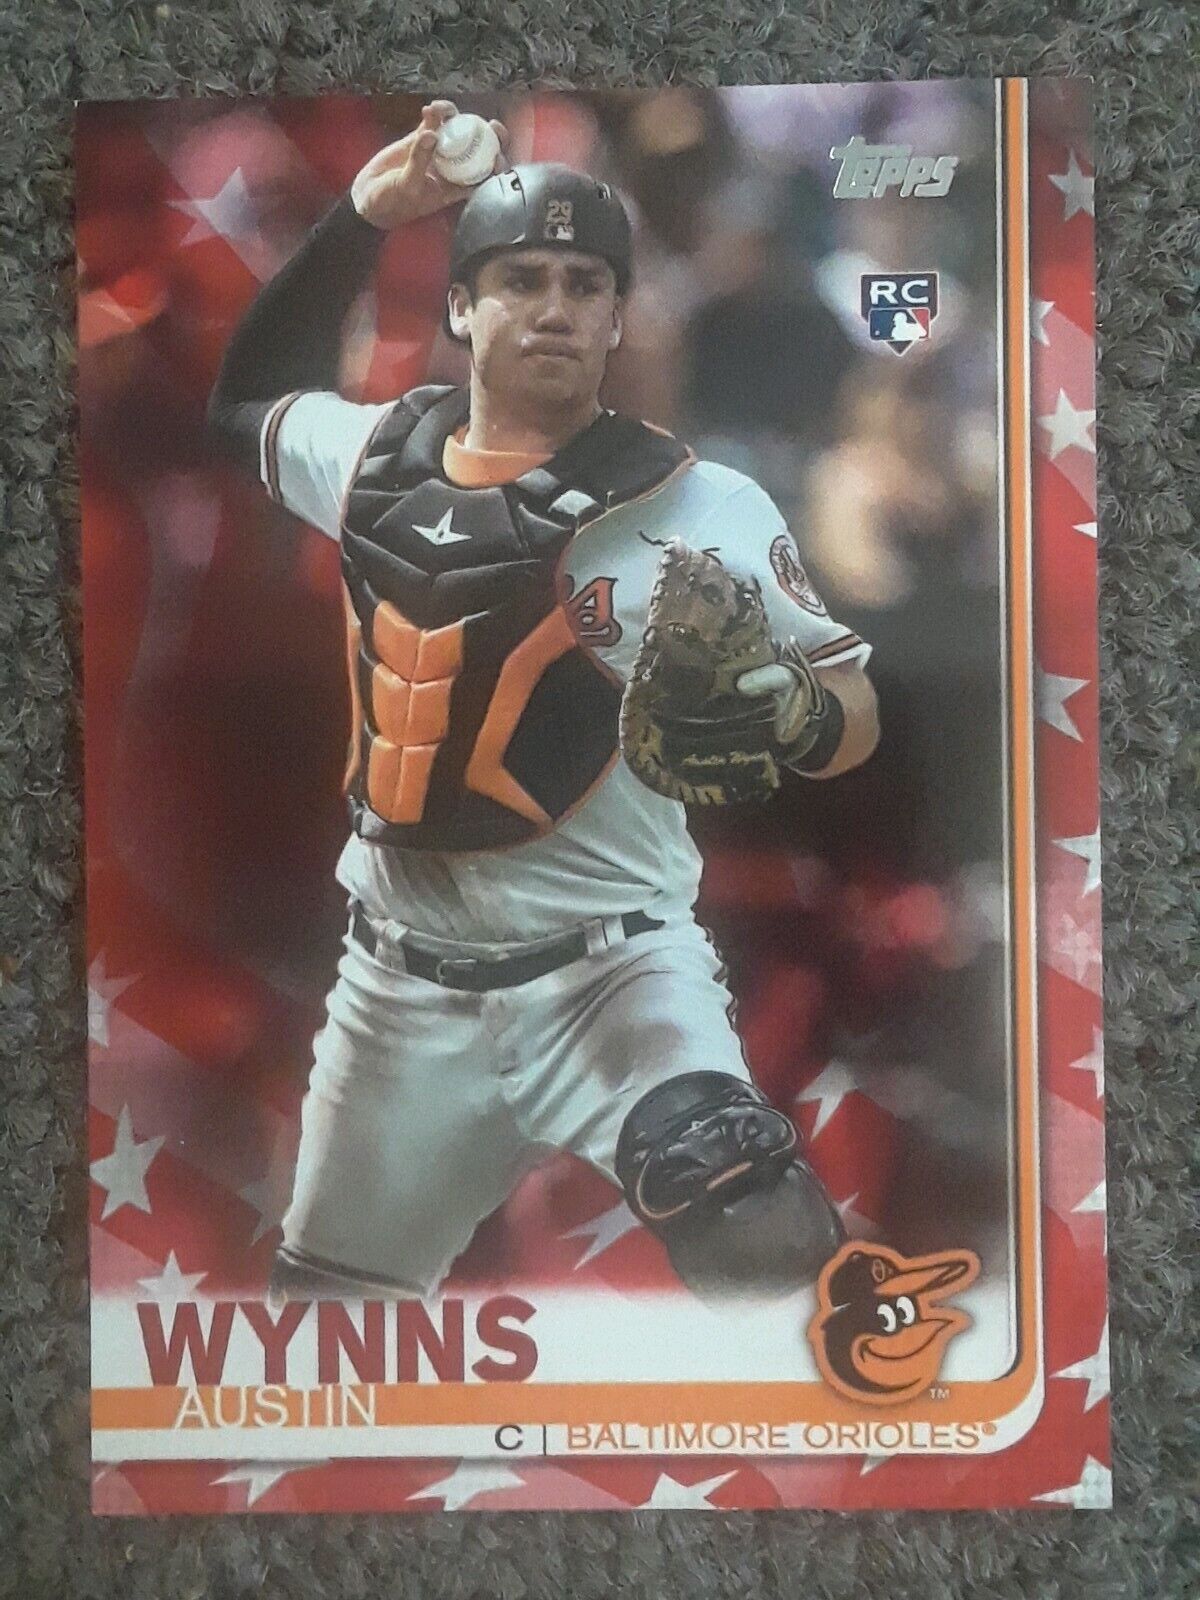 2019 Topps Series 2 Austin Wynns RC #2/76 Indepedence Day SP Baltimore Orioles 